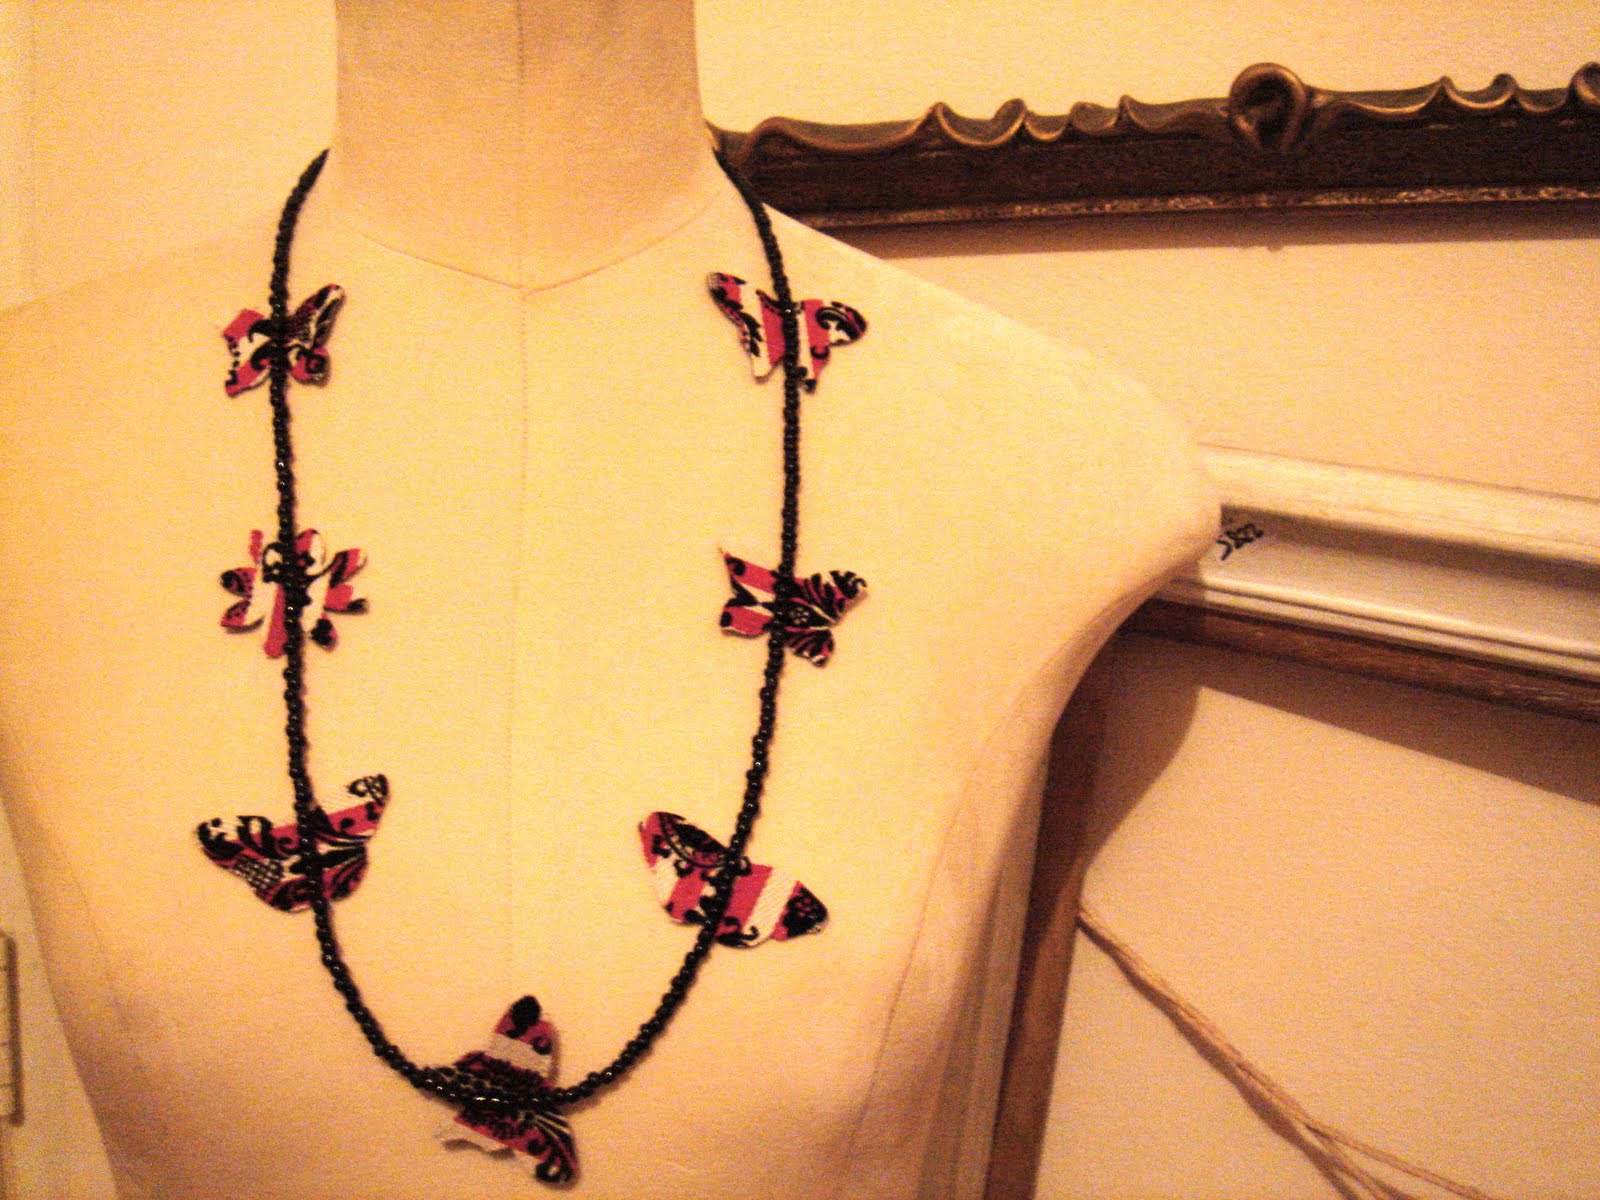 Butterfly necklace by Bron